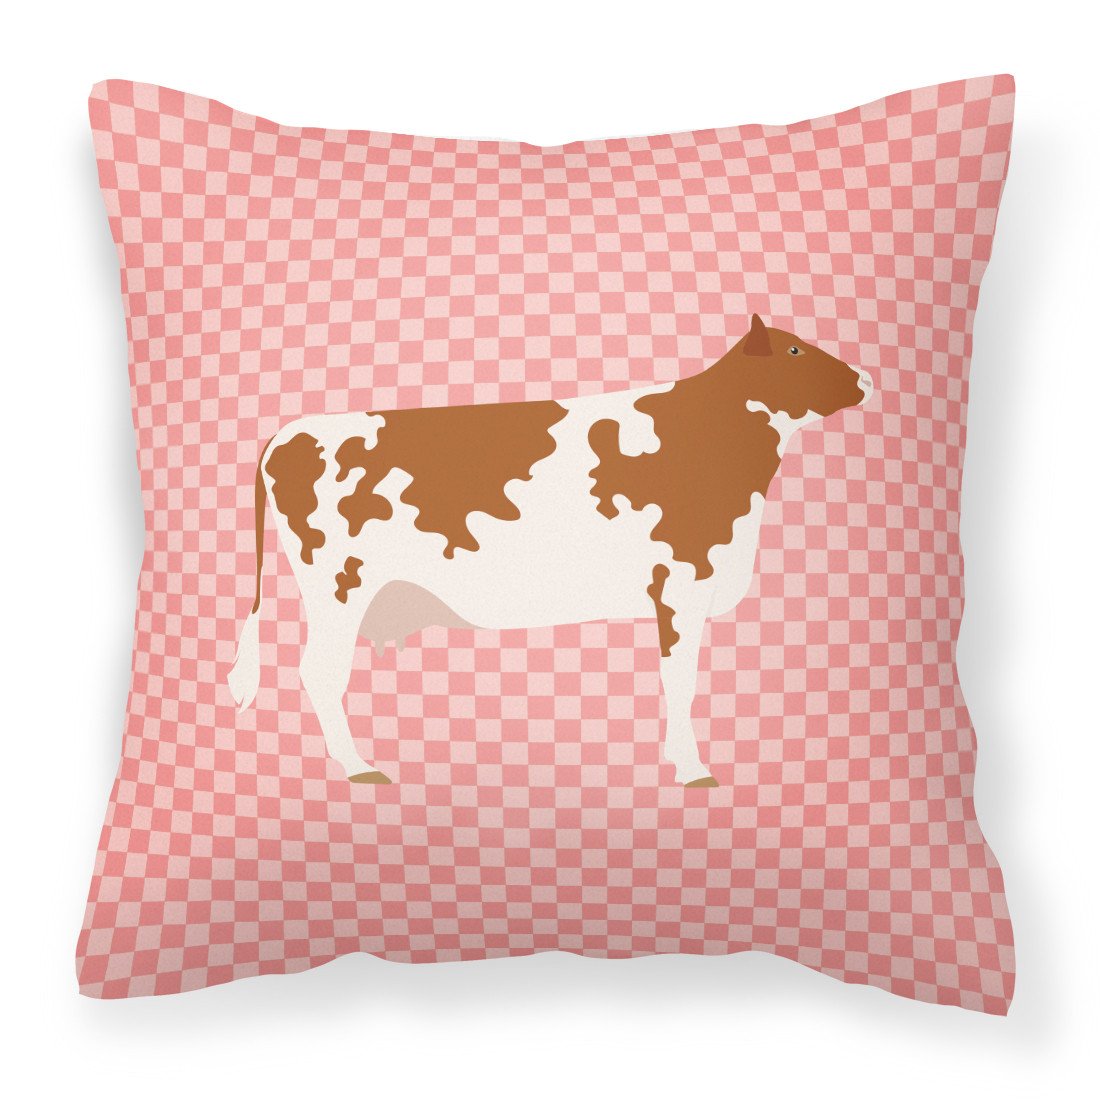 Ayrshire Cow Pink Check Fabric Decorative Pillow BB7827PW1818 by Caroline's Treasures